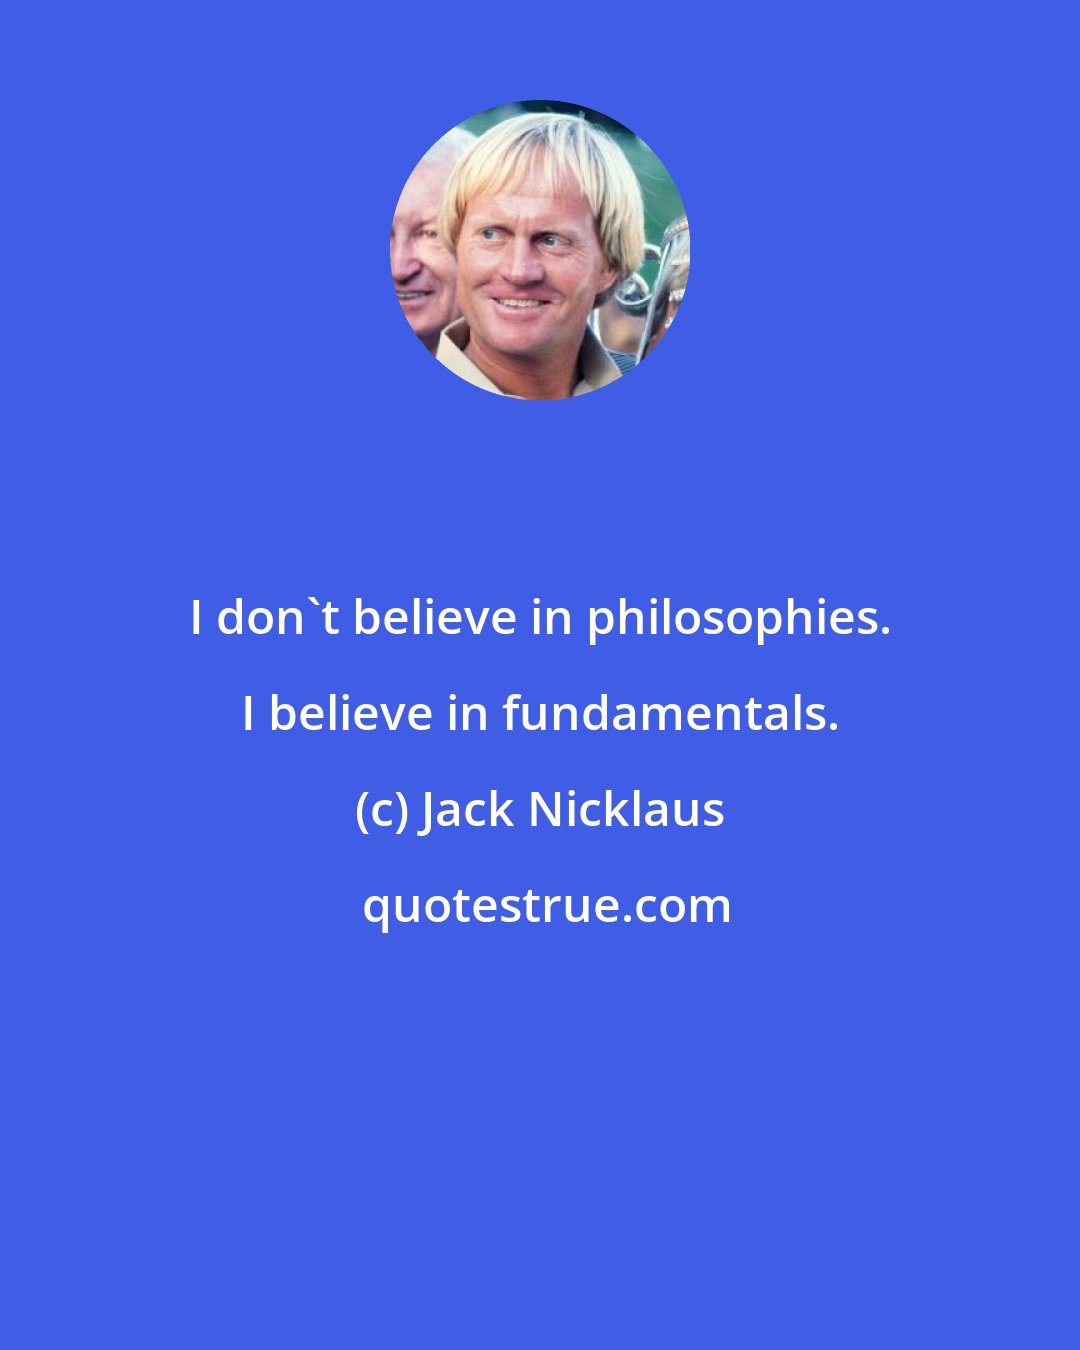 Jack Nicklaus: I don't believe in philosophies. I believe in fundamentals.